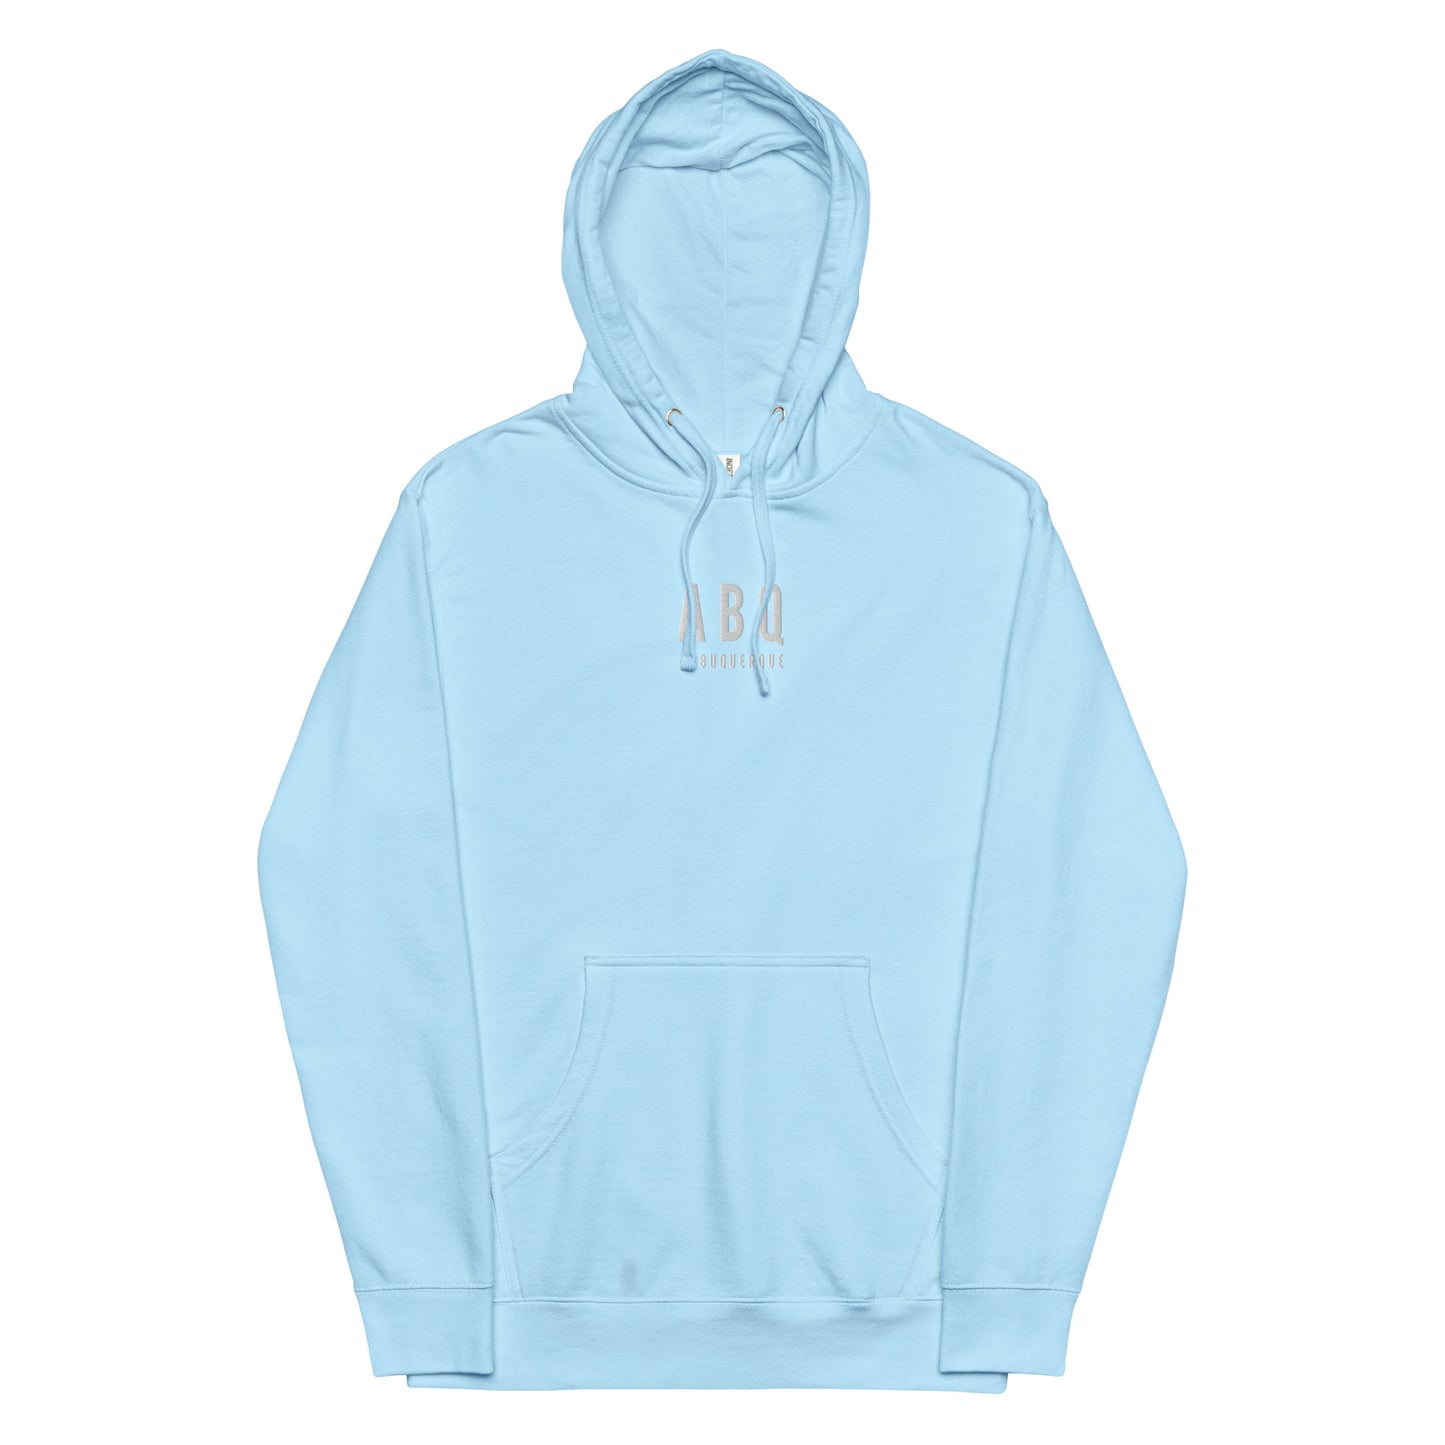 City Midweight Hoodie - White • ABQ Albuquerque • YHM Designs - Image 14